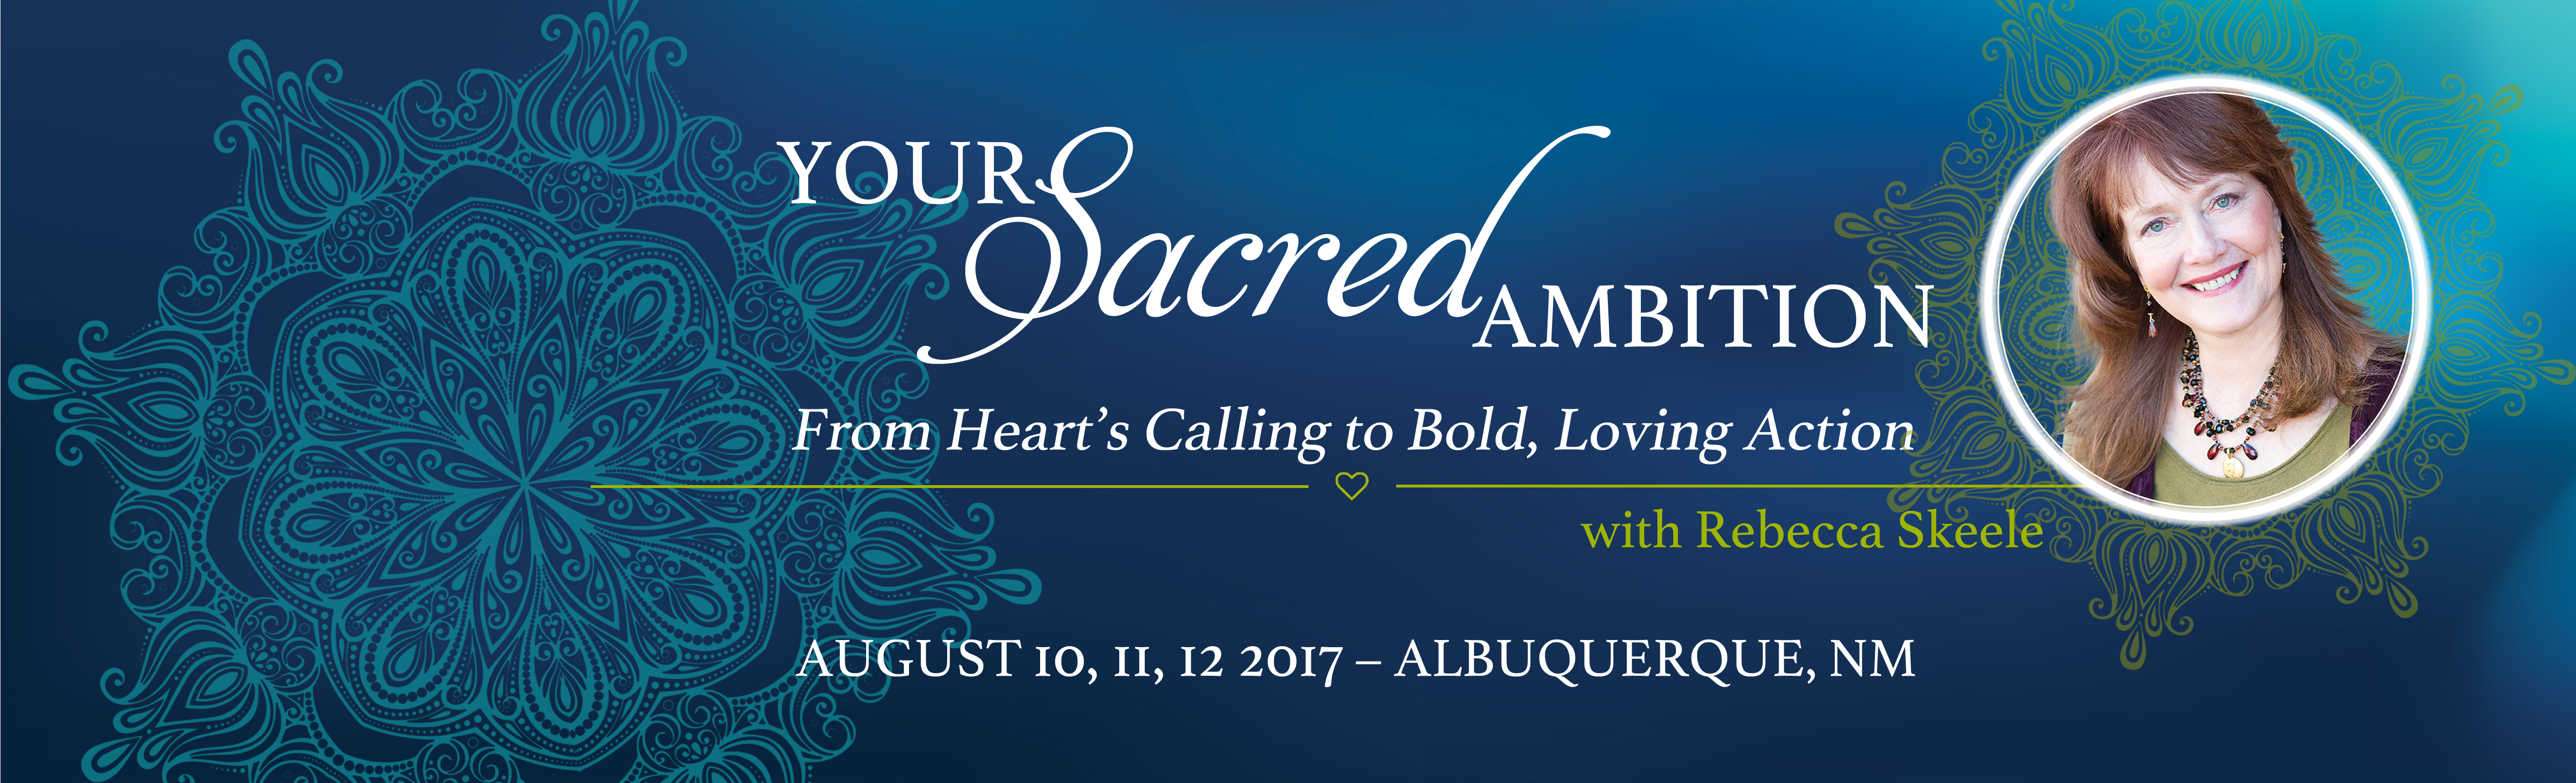 Your Sacred Ambition 2017